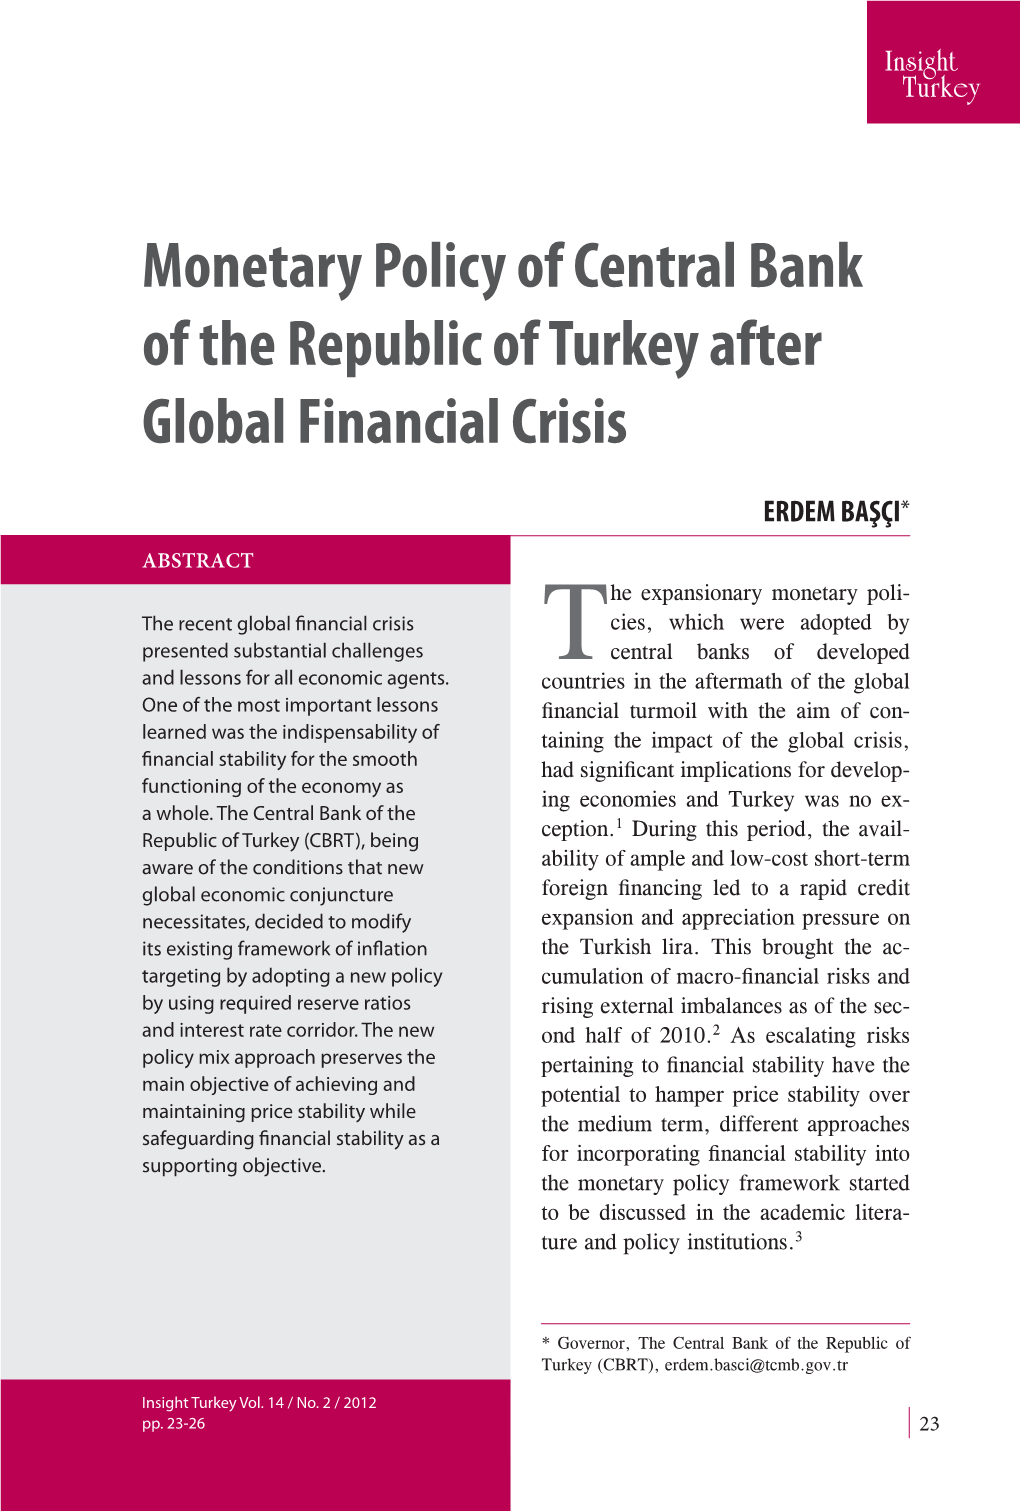 Monetary Policy of Central Bank of the Republic of Turkey After Global Financial Crisis